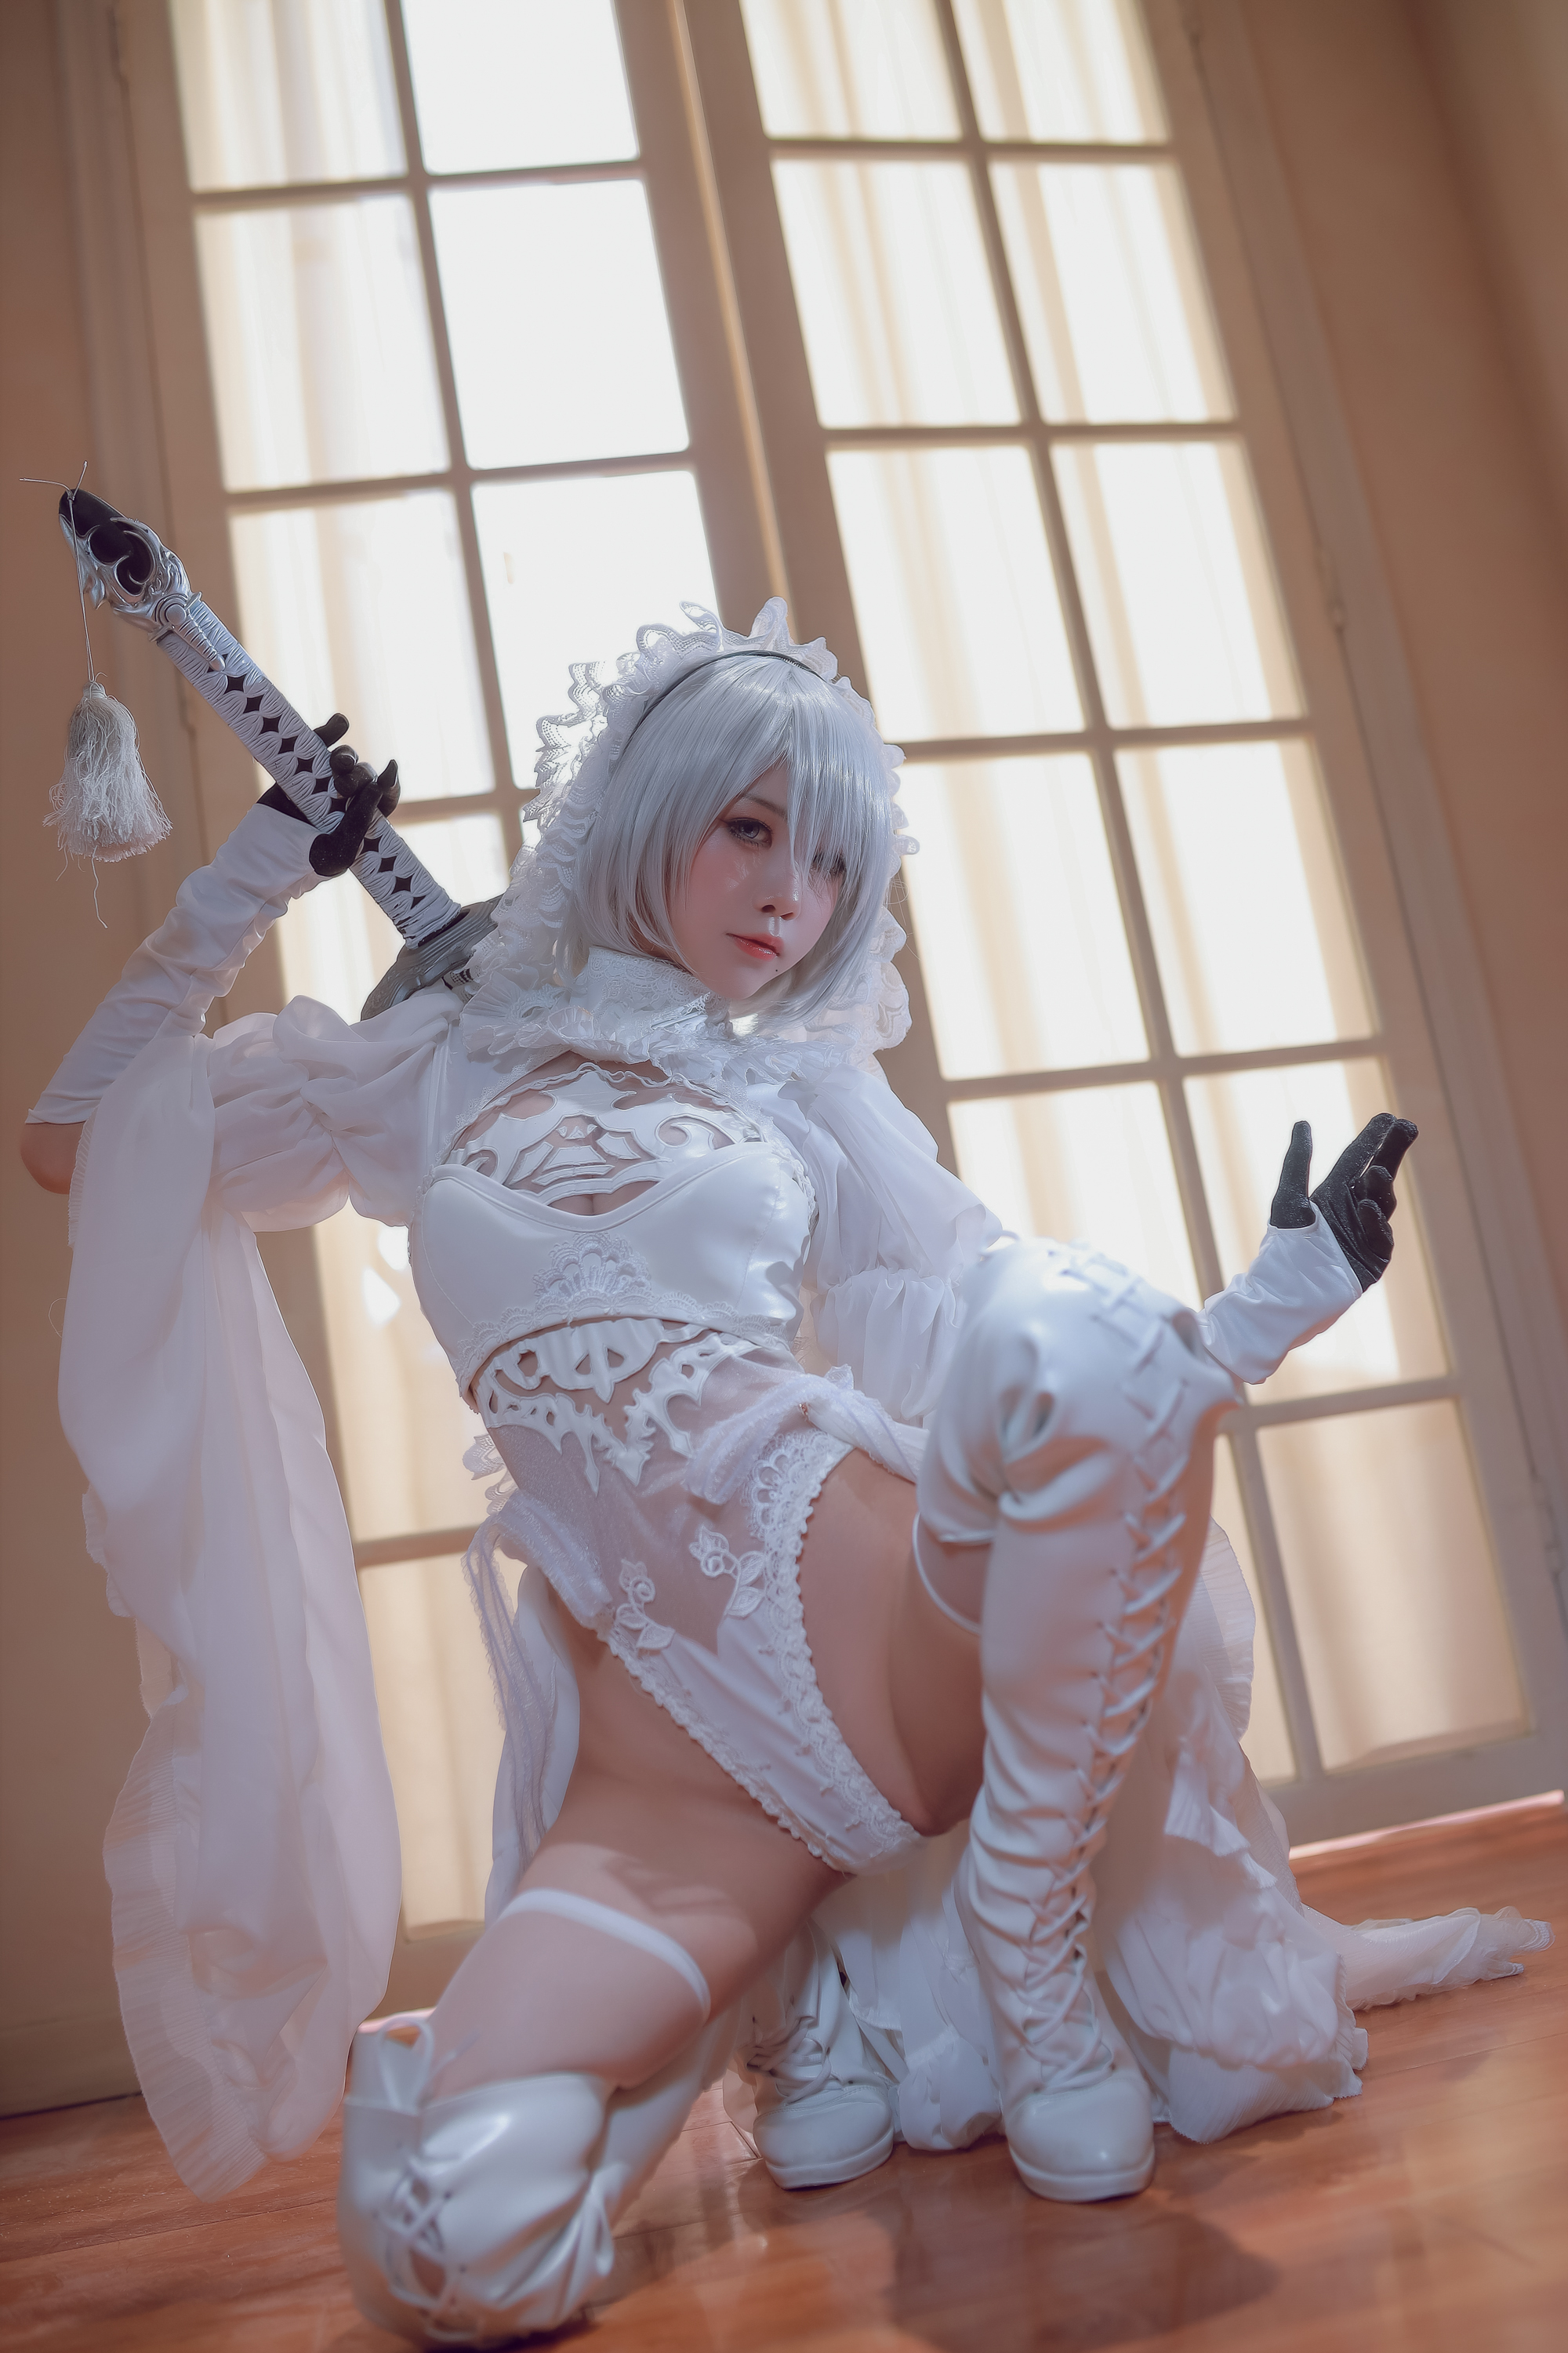 People 2000x3001 Shuimiaoaqua women model cosplay Asian 2B (Nier: Automata) Nier: Automata video games video game girls brides veils lingerie bodysuit stockings thigh high boots indoors women indoors by the window portrait display looking at viewer white hair white clothing hair over one eye white stockings spread legs